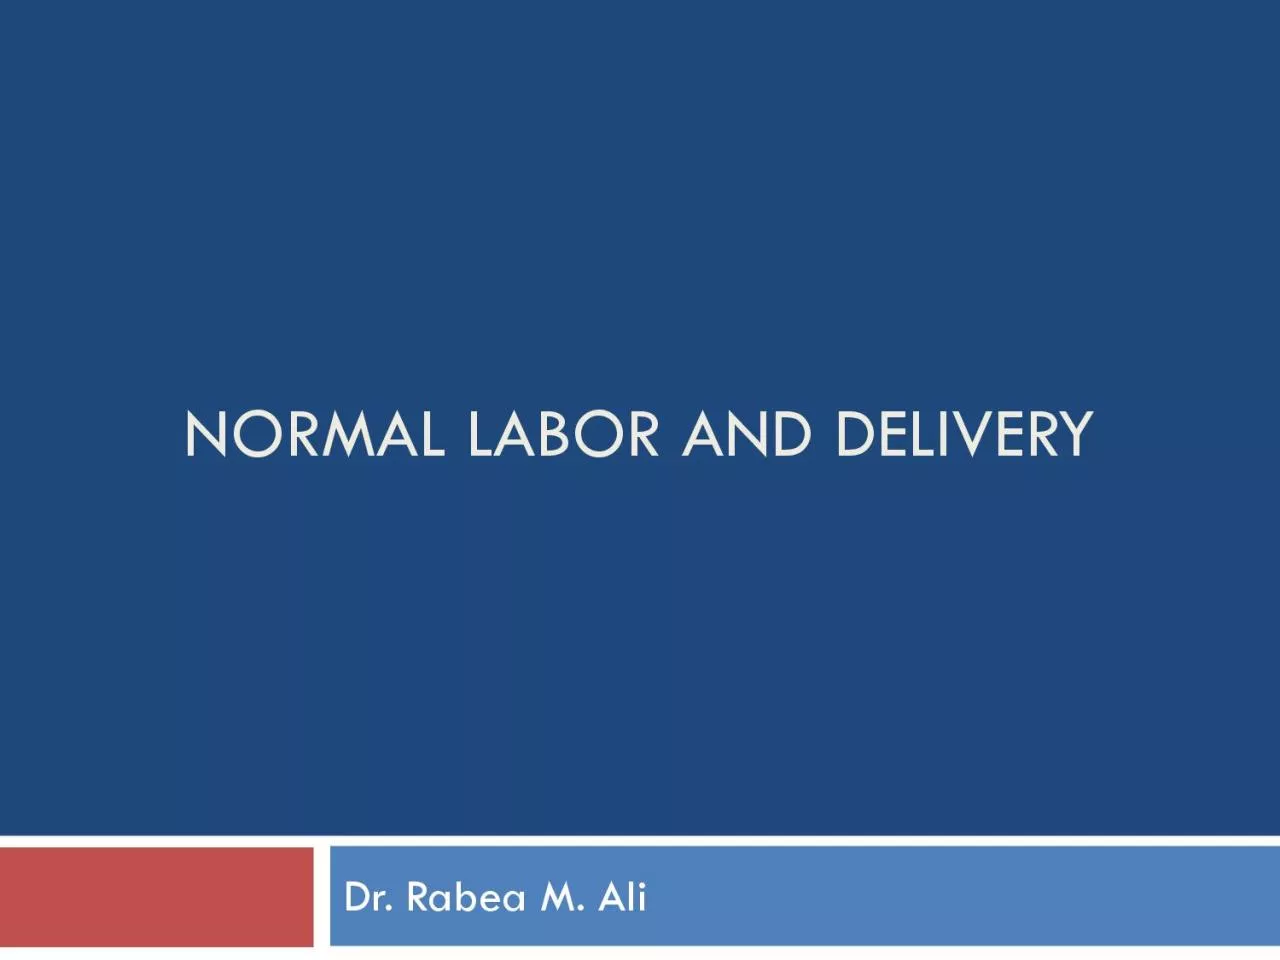 NORMAL LABOR AND DELIVERY